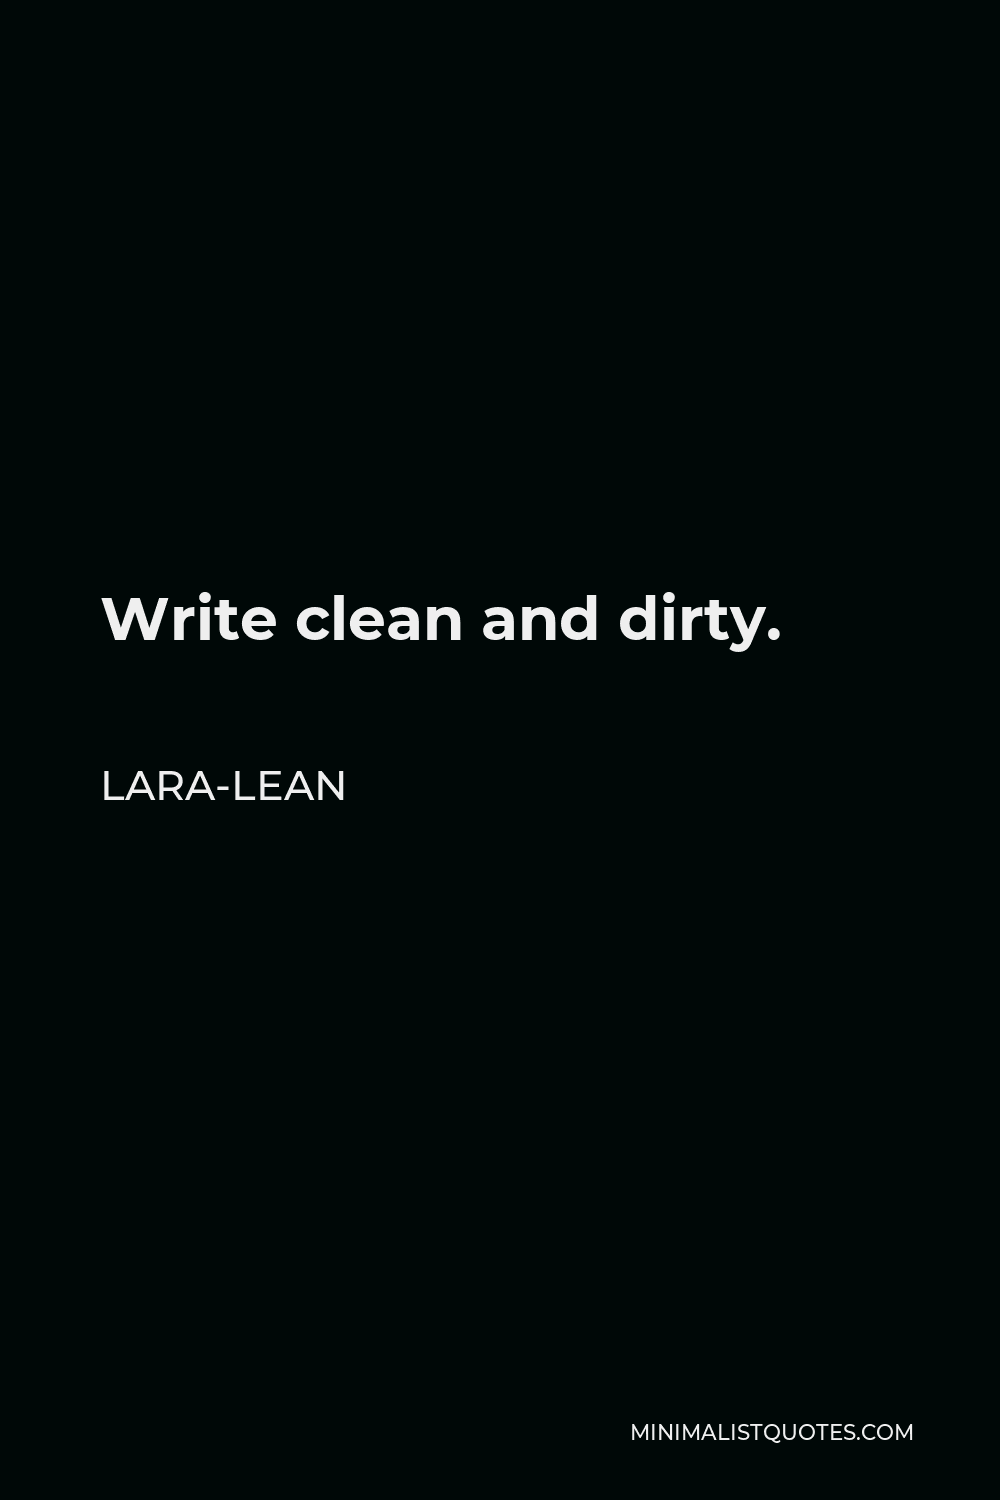 Lara-Lean Quote - Write clean and dirty.